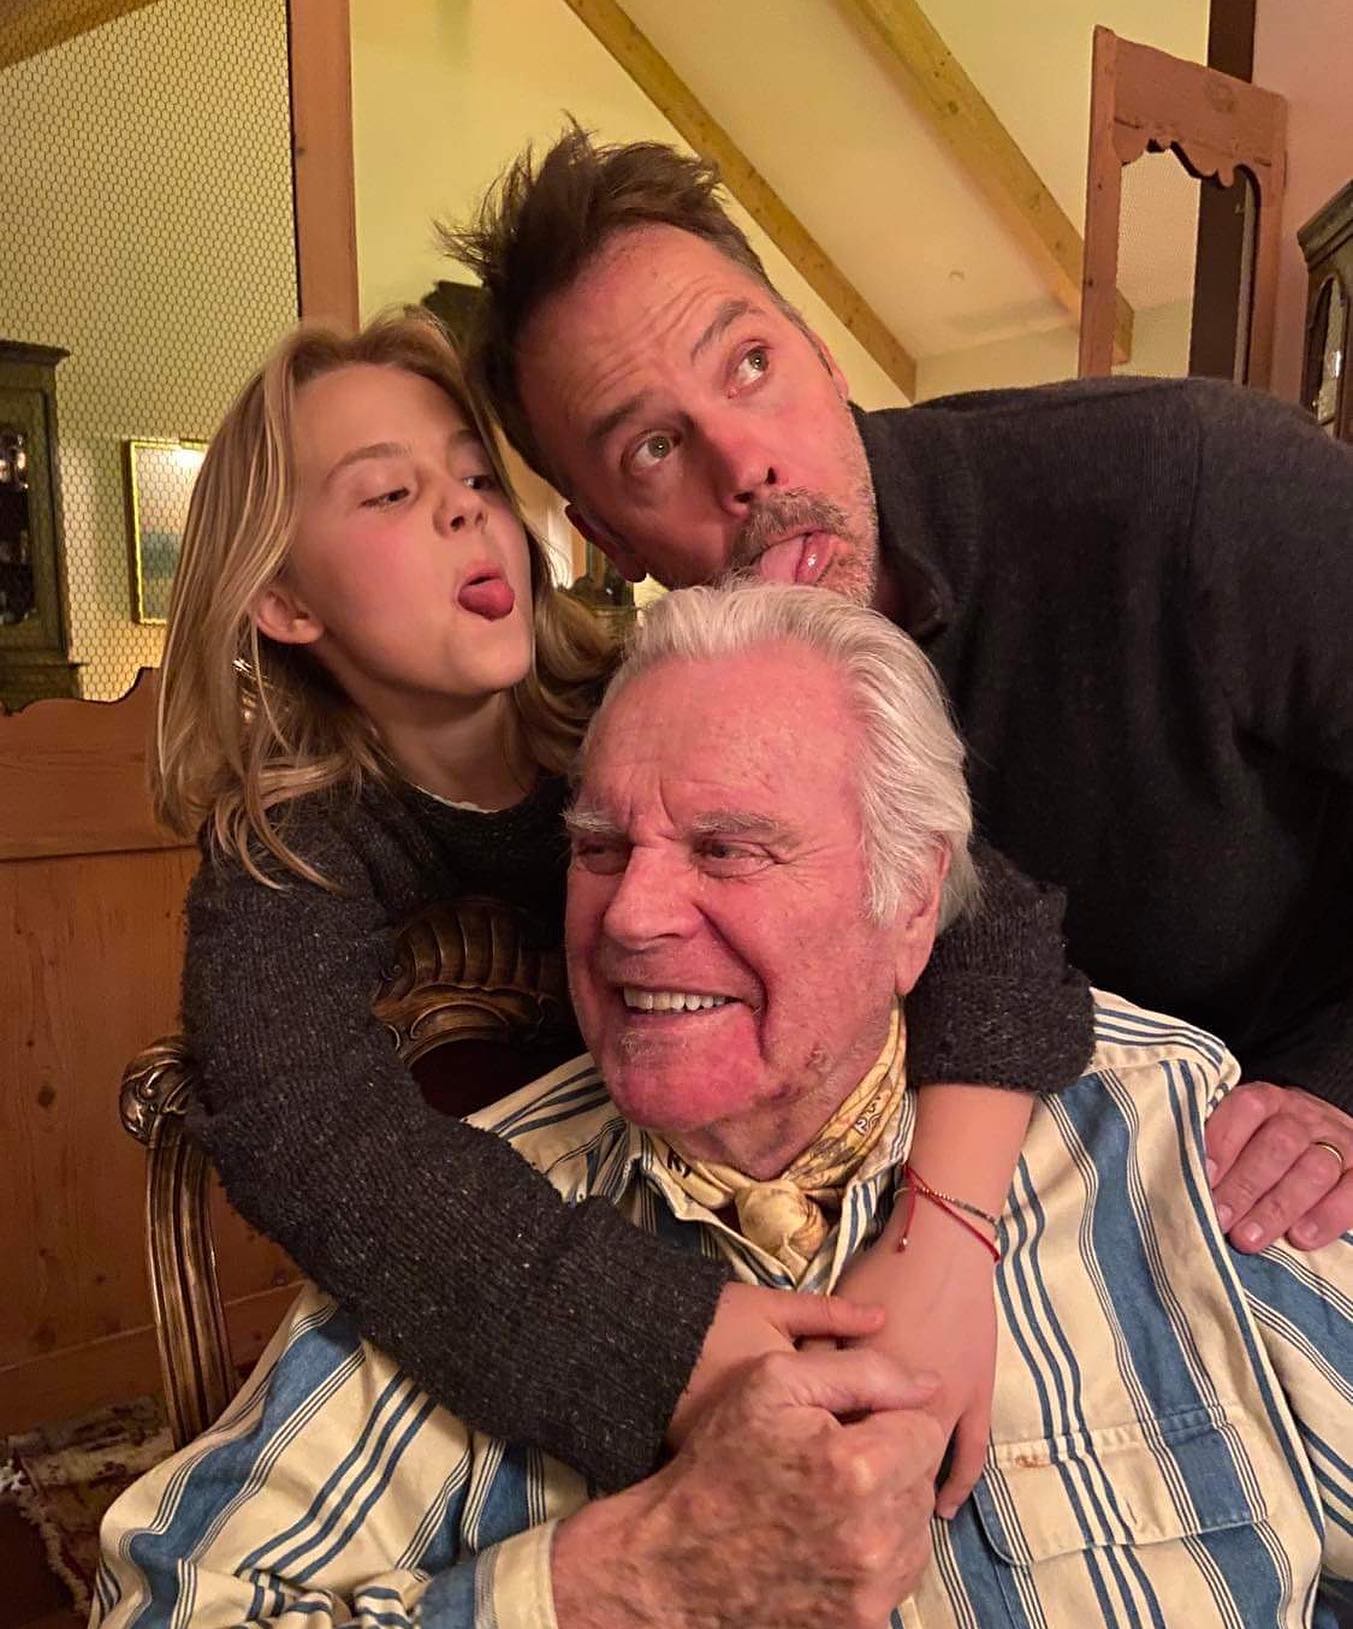 Happy Birthday to my terrific son in law @realbarrywatson ..Barry is an incredible husband ,father and always fun to be around! Hope you have a great day! 
.
.
.
#robertwagner #barrywatson #natashagregsonwagner #happybirthday #soninlaw #family #JonathanHart #AnthonyDiNozoSr #HarttoHart #7thHeaven #MattCamden